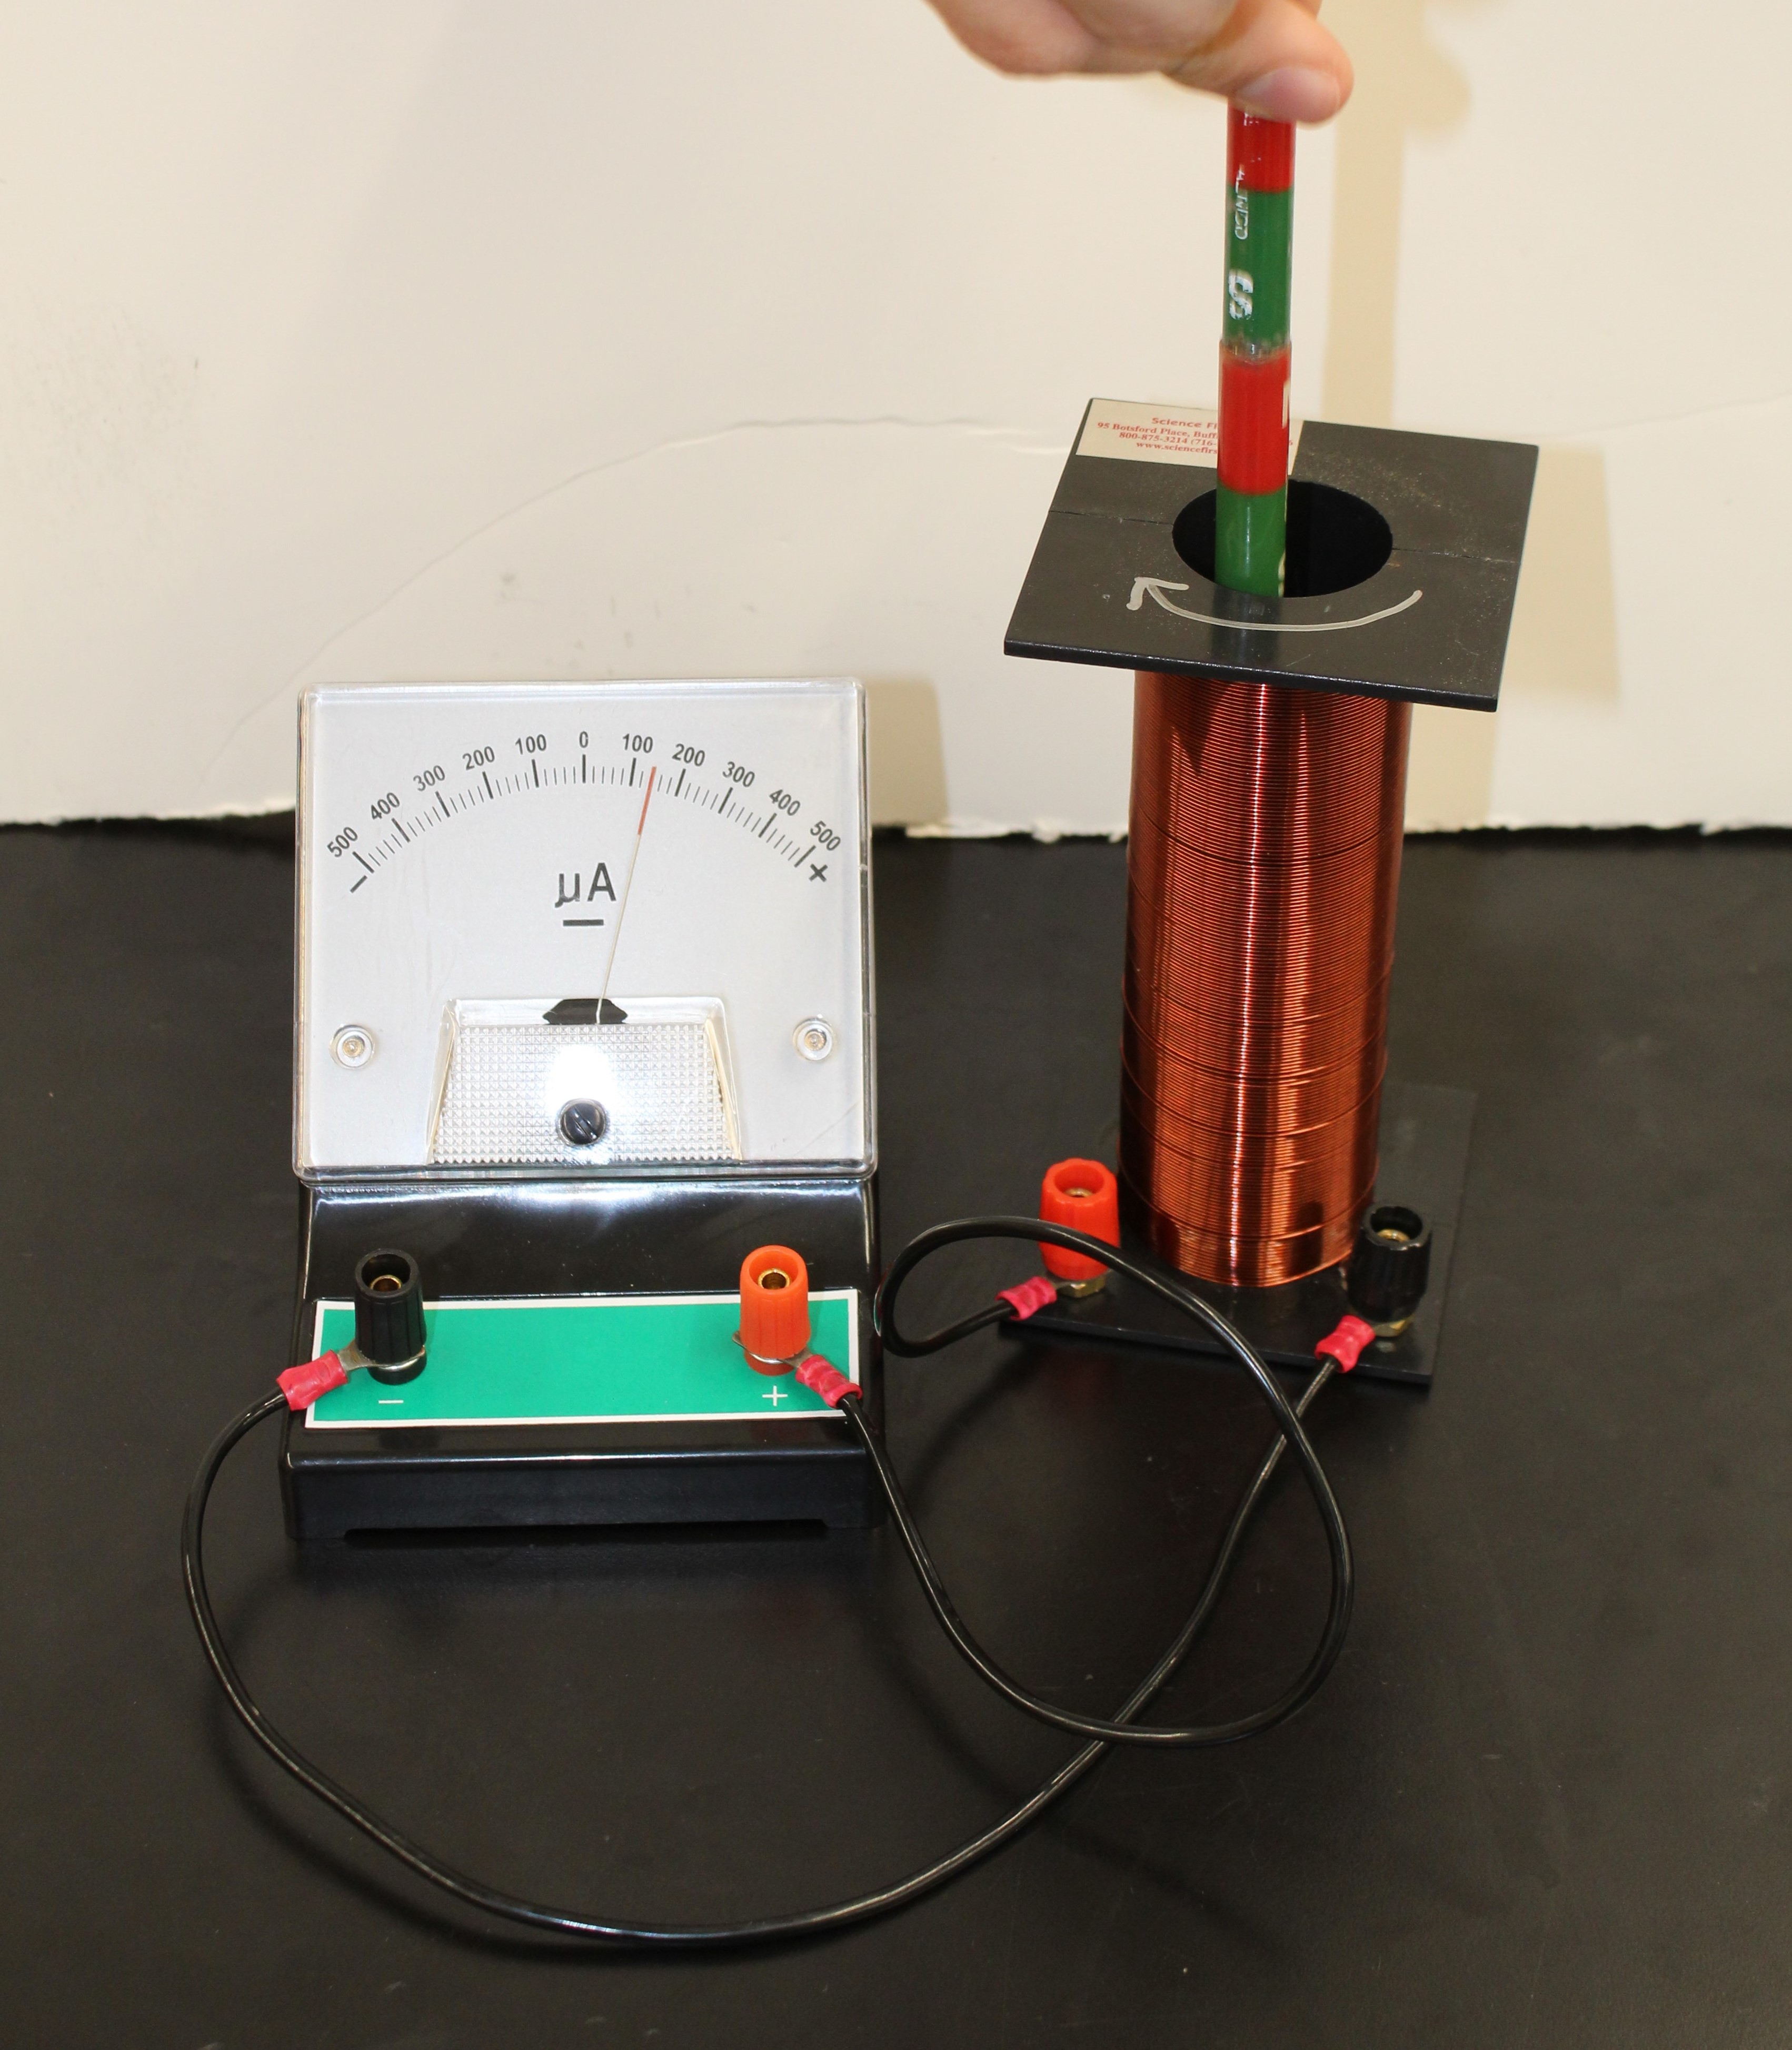 The Galvanometer hooked up to the solinoid with two spade wires. A Hand is lowering two barmagnets stuck end on end into the solenoid and the needle on the Galvanometer is deflected to the right to about 150 microamps